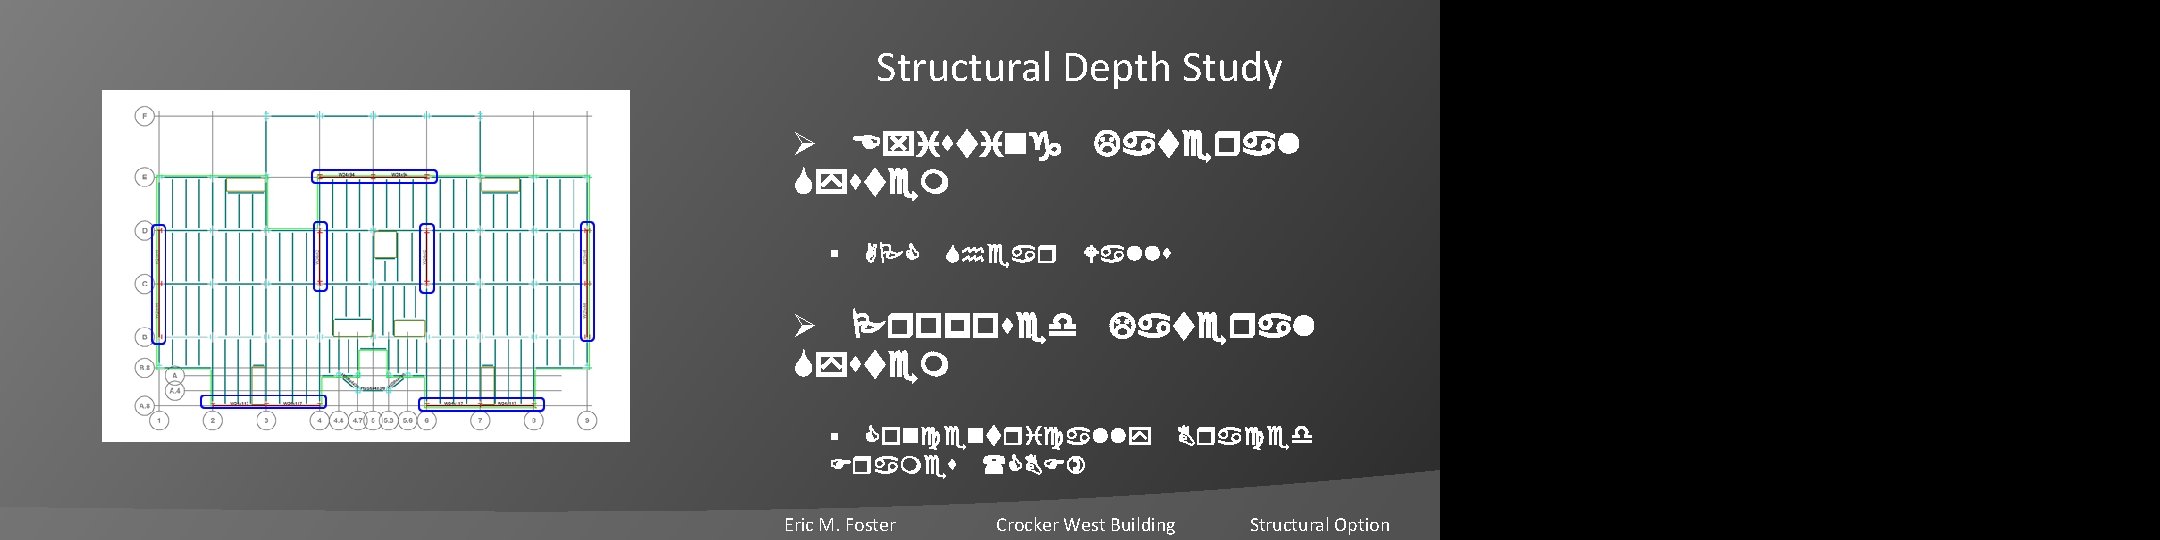 Structural Depth Study Ø Existing Lateral System § APC Shear Walls Ø Proposed Lateral